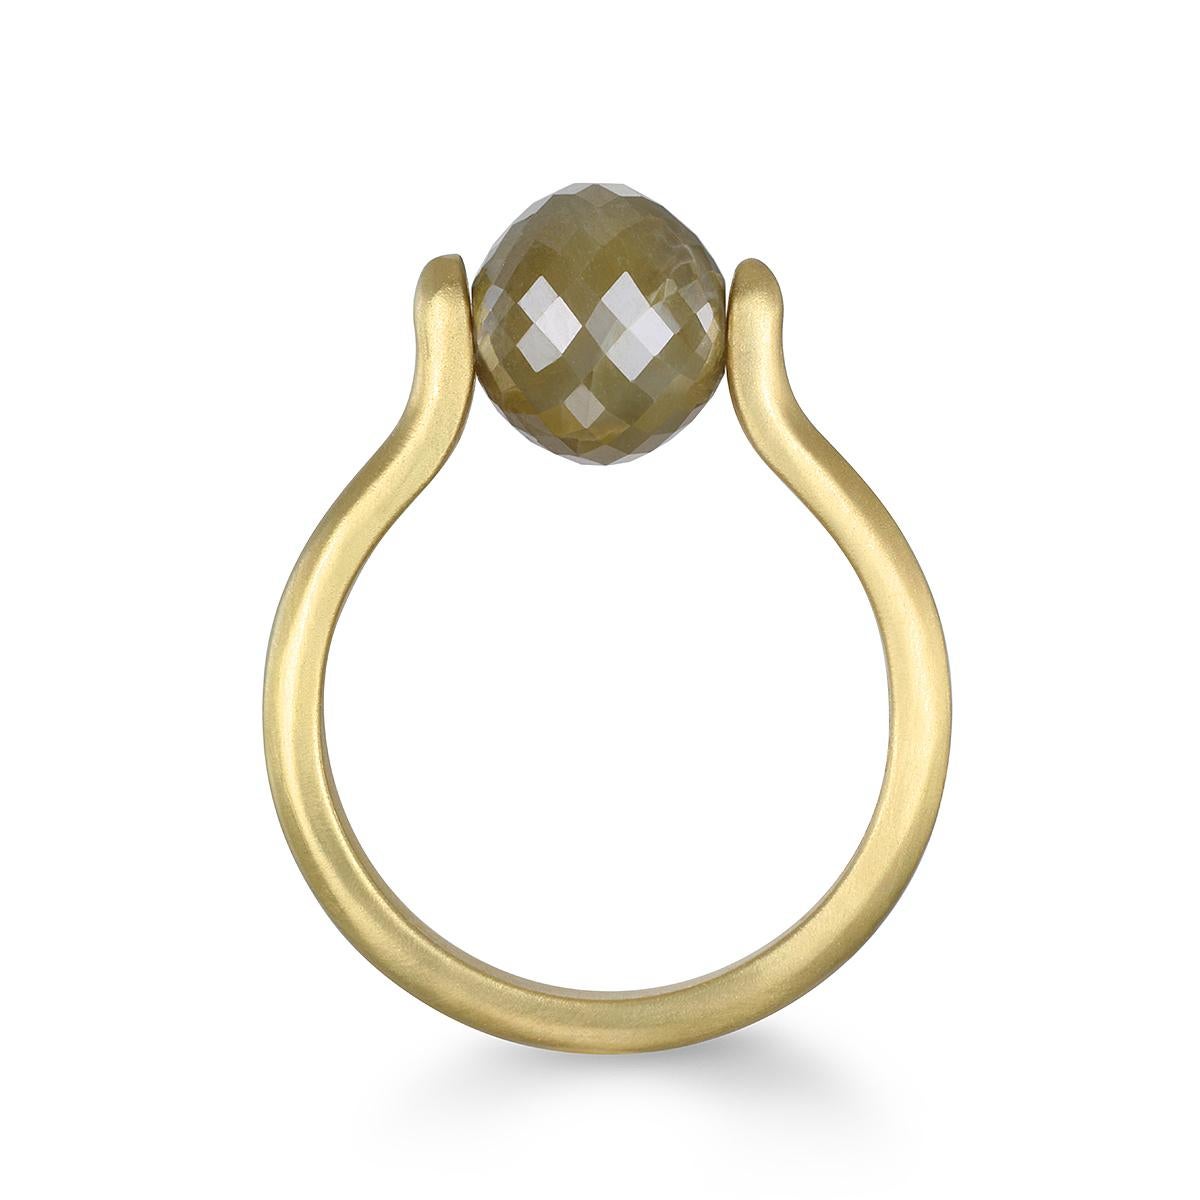 Faye Kim's 18 Karat Gold Faceted Milky Diamond Bead Ring, with its beautiful color, size, luster and matte finish, is both sophisticated and timeless! Perfect as a fashion/cocktail ring or engagement ring.

Diamond: 9.8 carats, 8.9mm
Size 8 (Can be